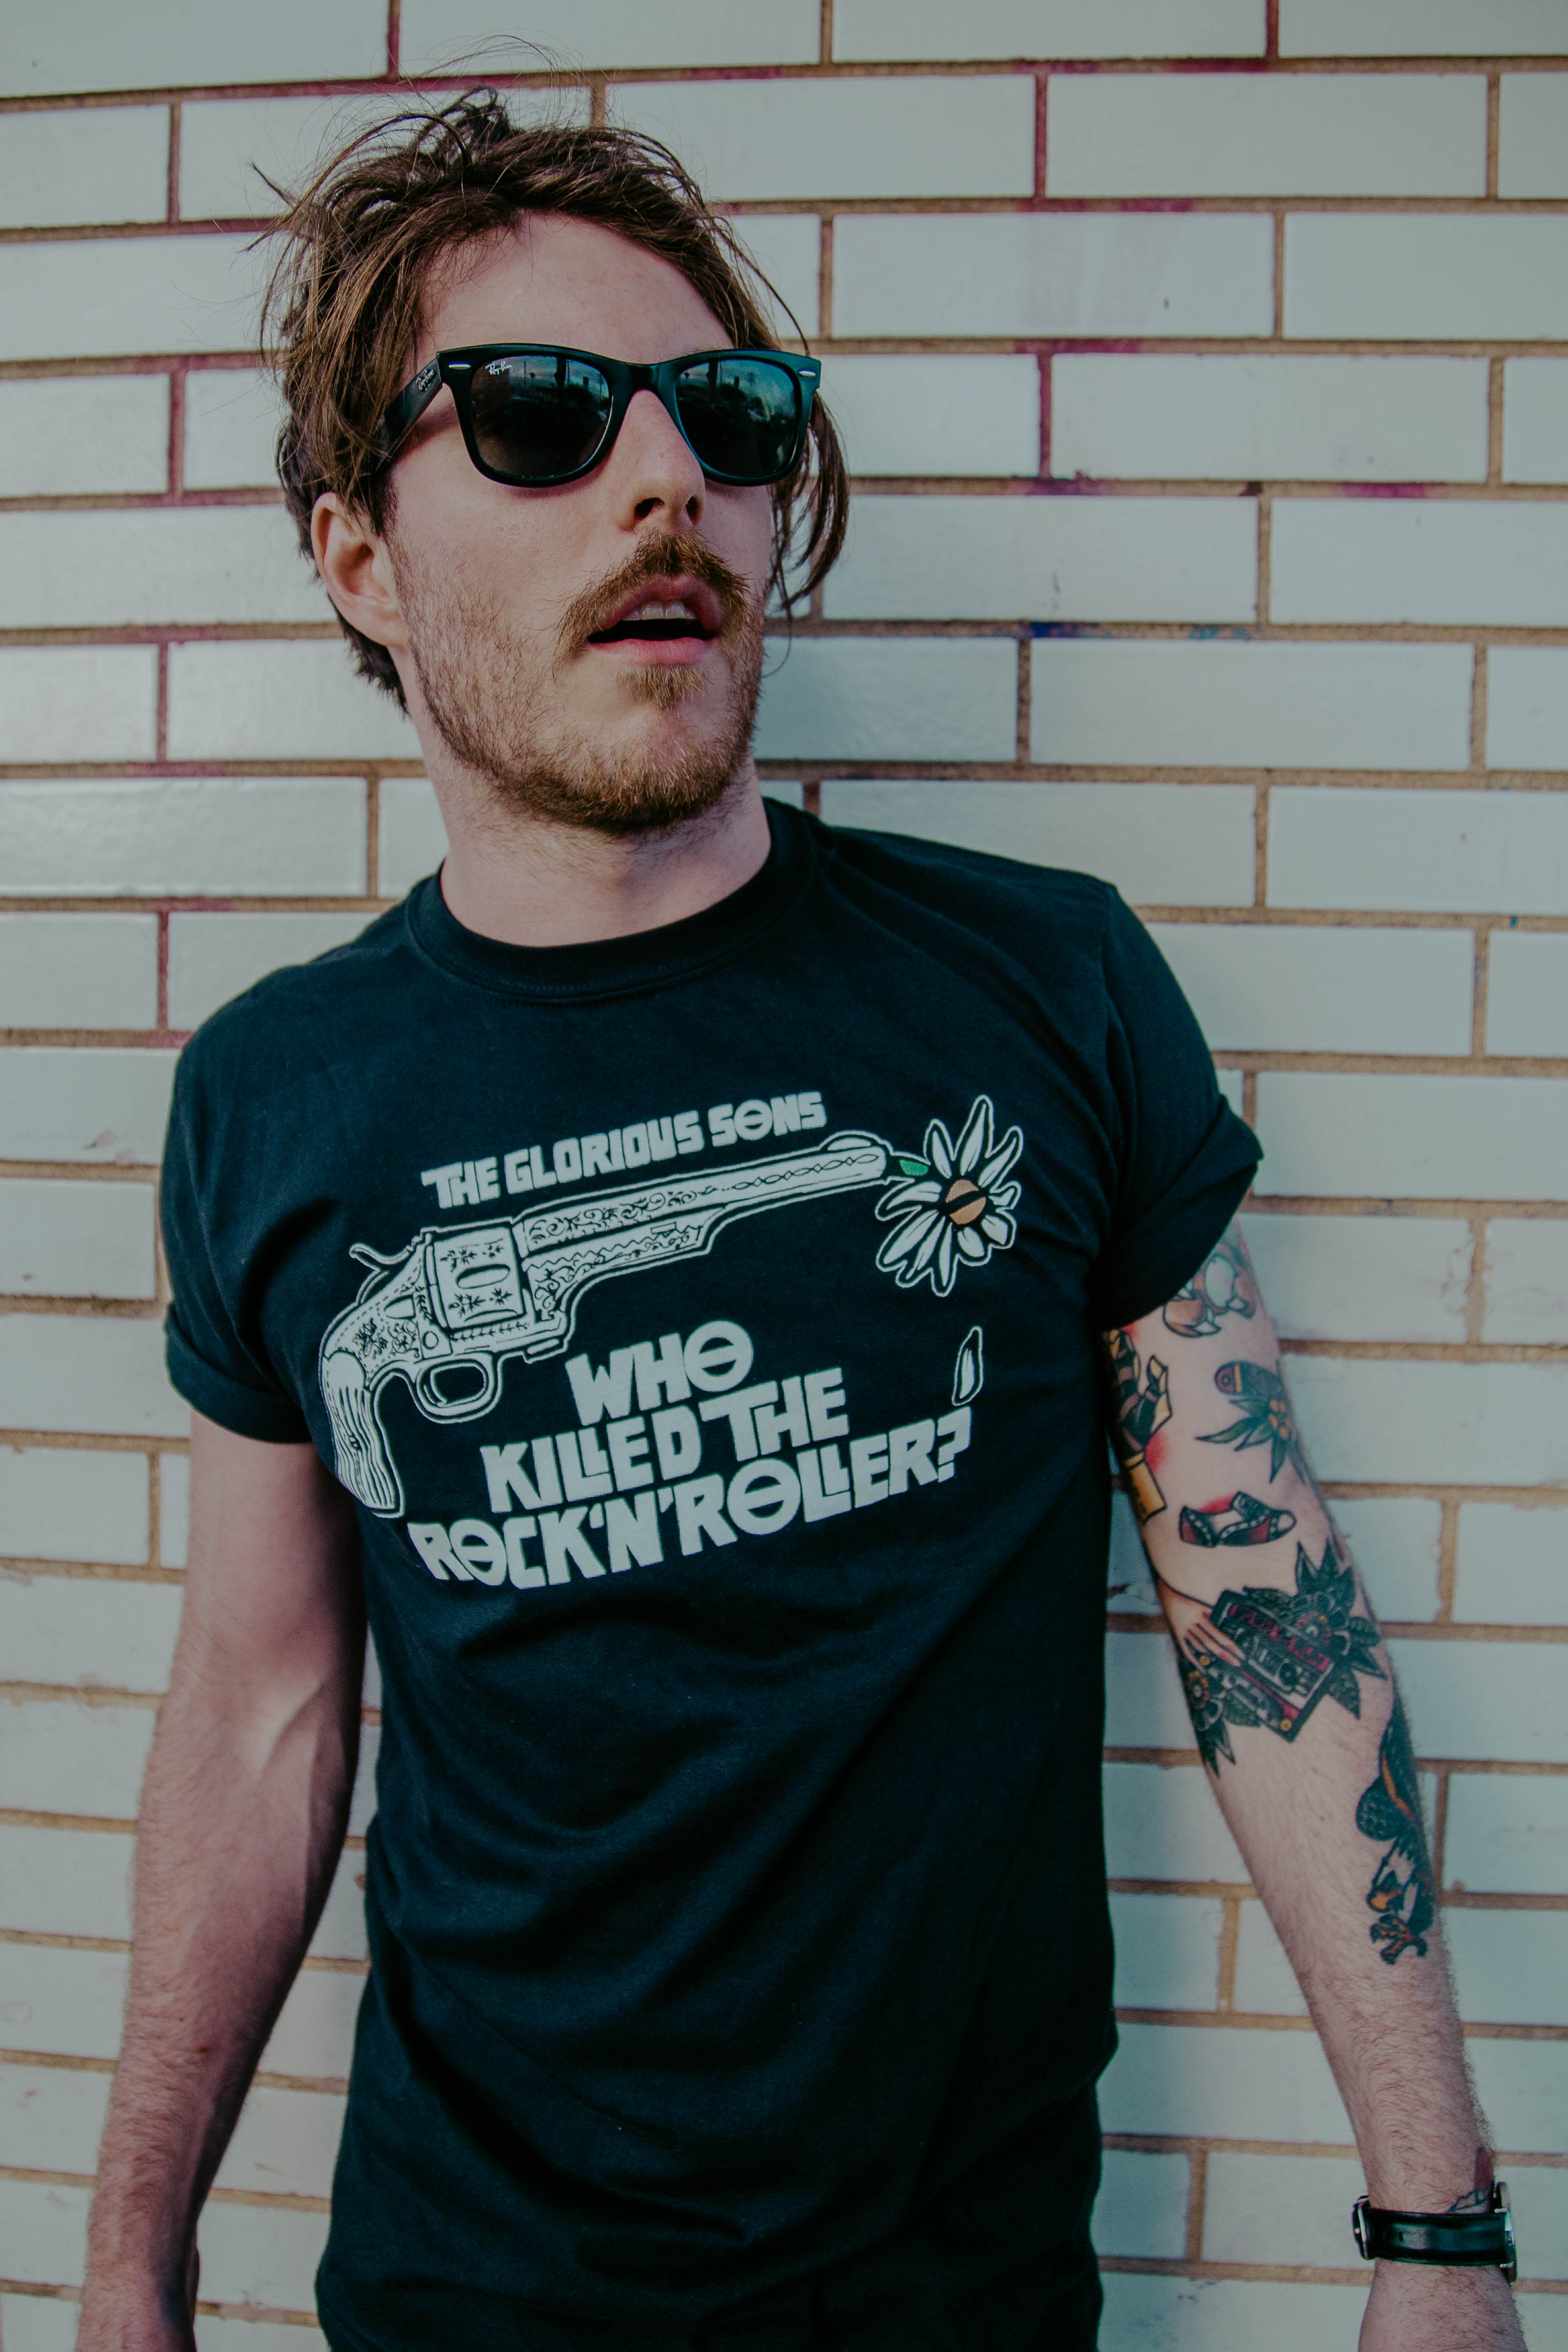 The Glorious Sons - Who Killed The Rock & Roller - Black Tee – KT8 ...